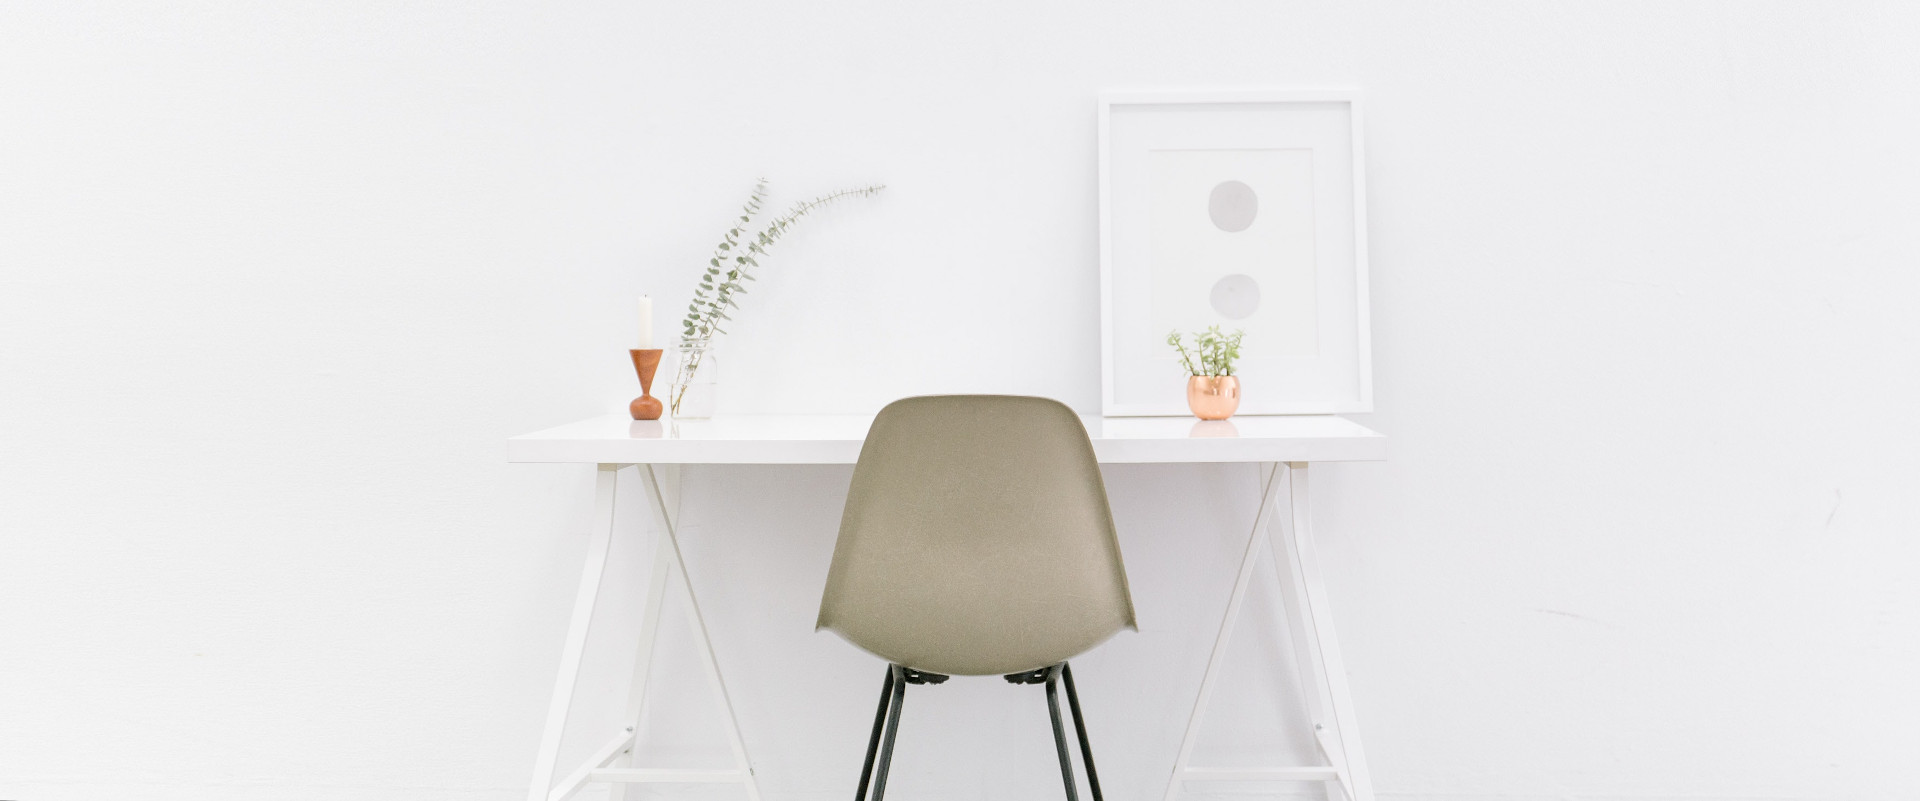 Minimalism blooms into richer lives